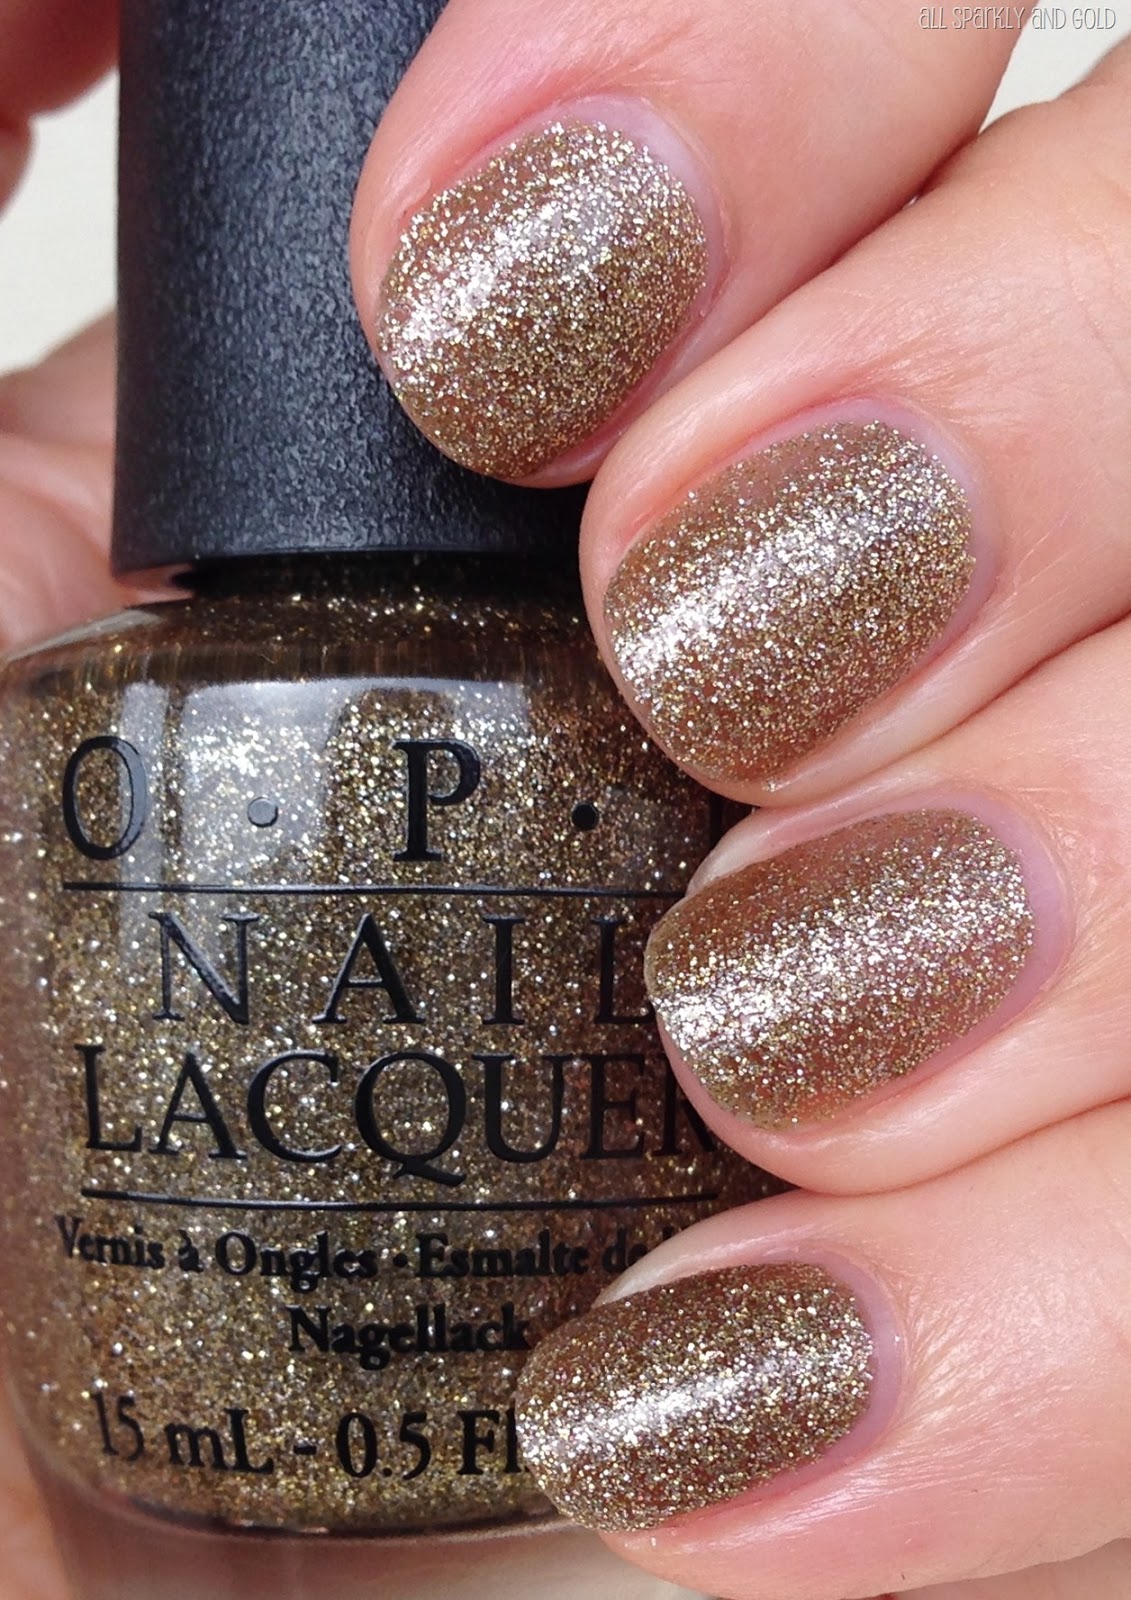 [OPI%2520All%2520Sparkly%2520and%2520Gold%25202%255B4%255D.jpg]